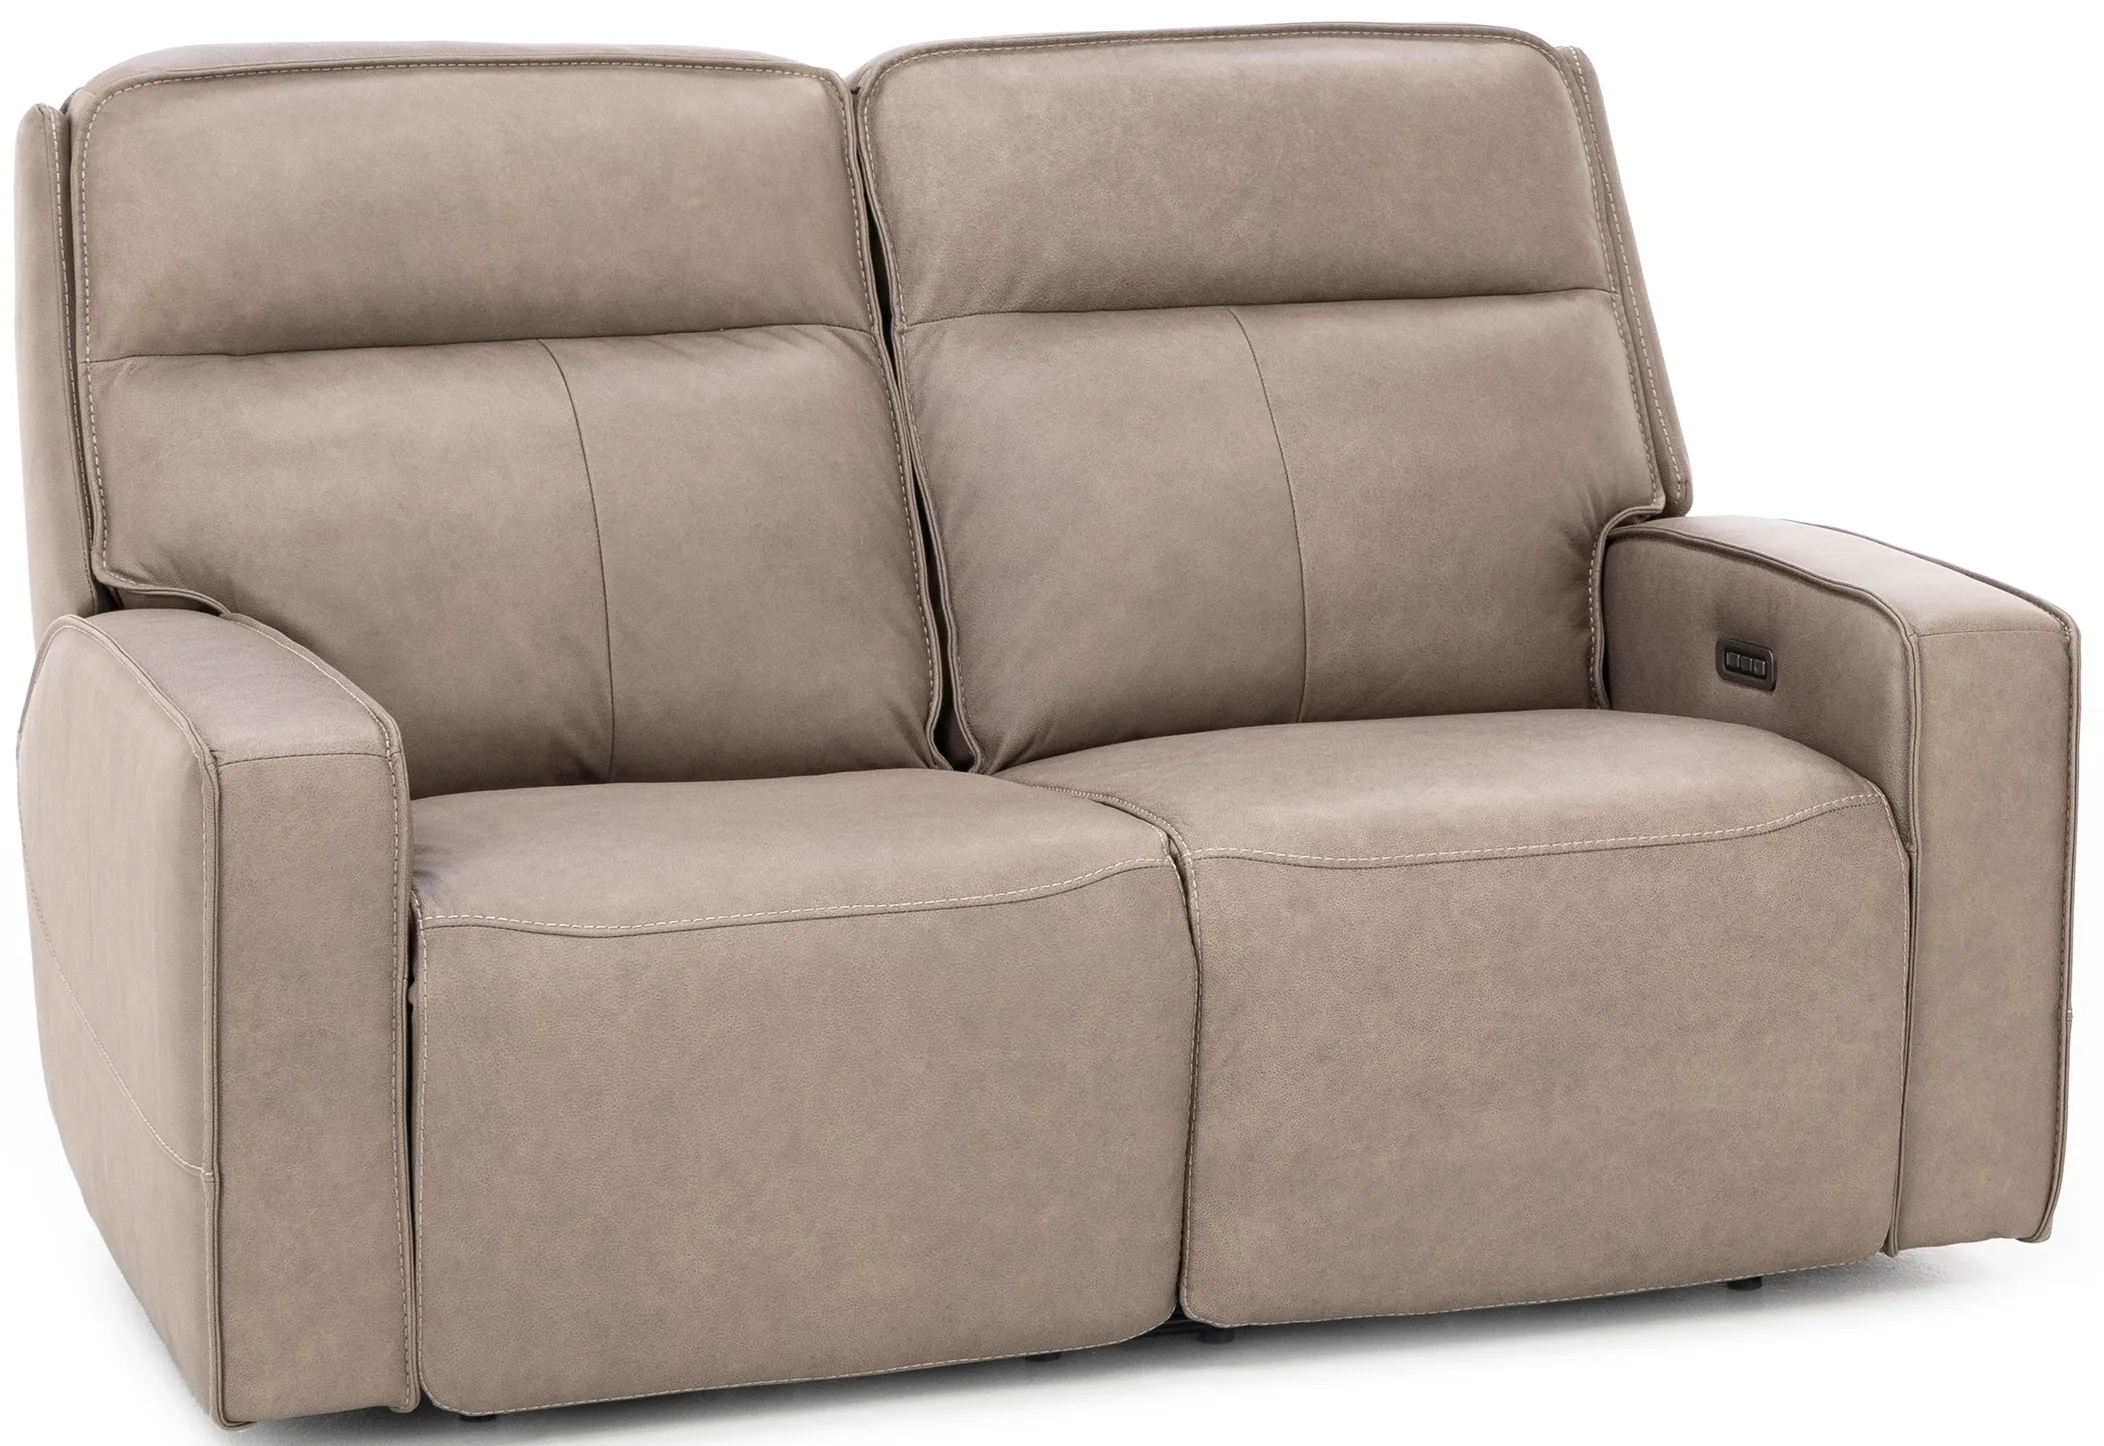 Morgan Leather Fully Loaded Reclining Loveseat in Oyster